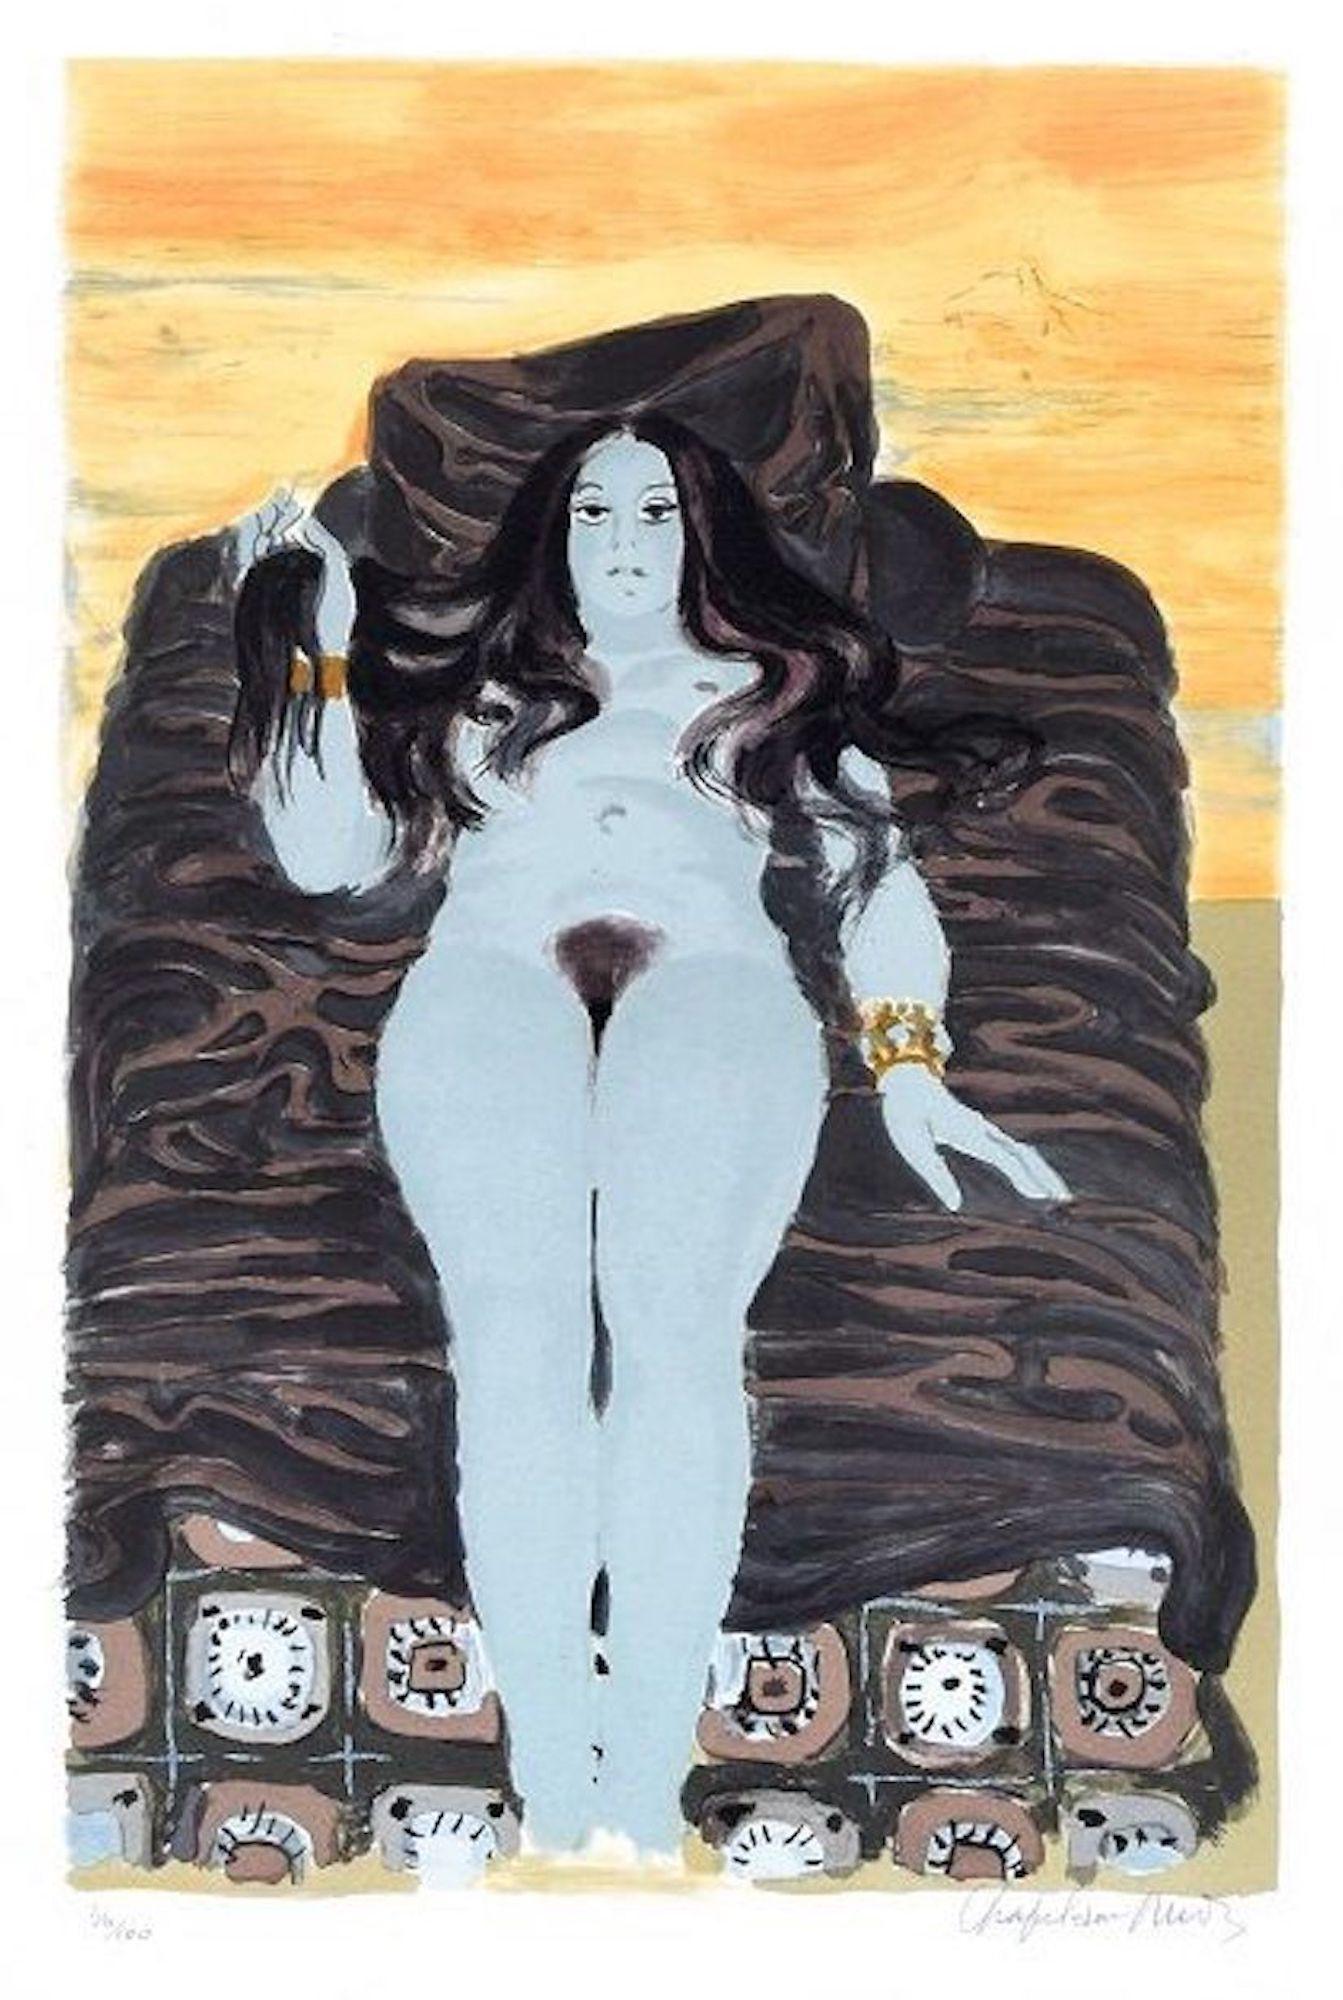 Roger Chapelain Midy Nude Print - The Rest - Original Lithograph by R. Chapelain-Midy - 1970s